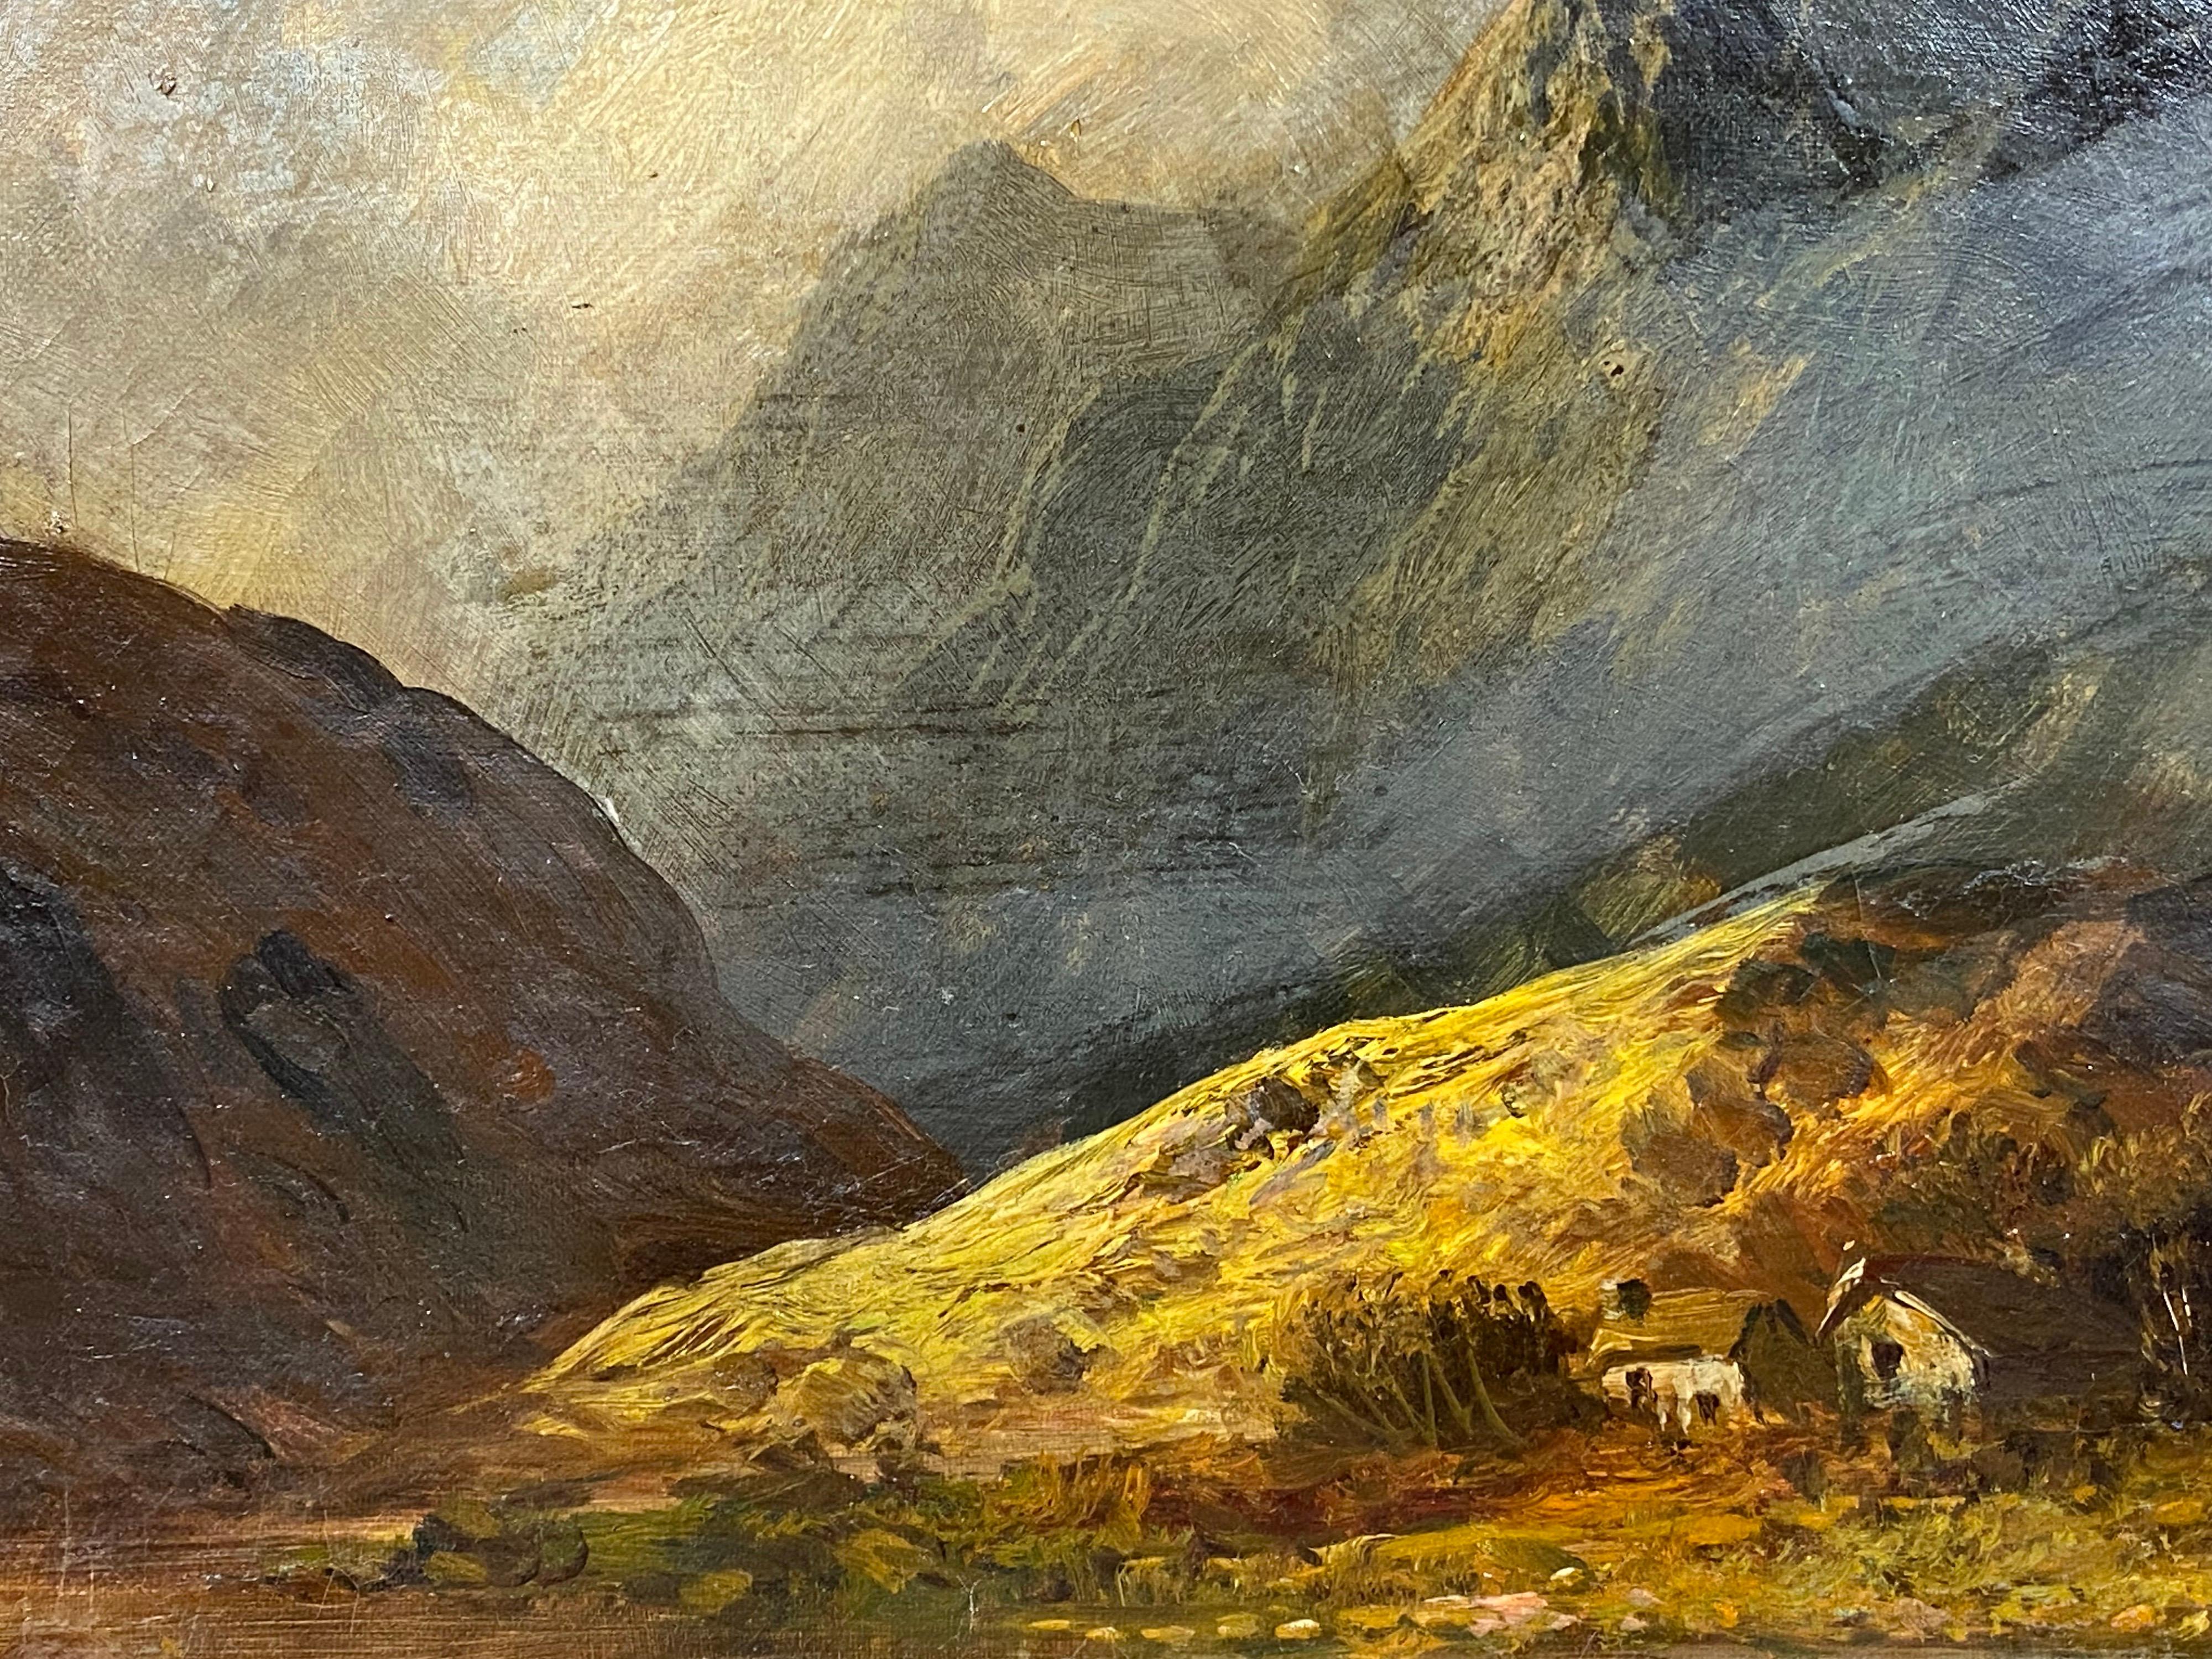 paintings of scottish highlands